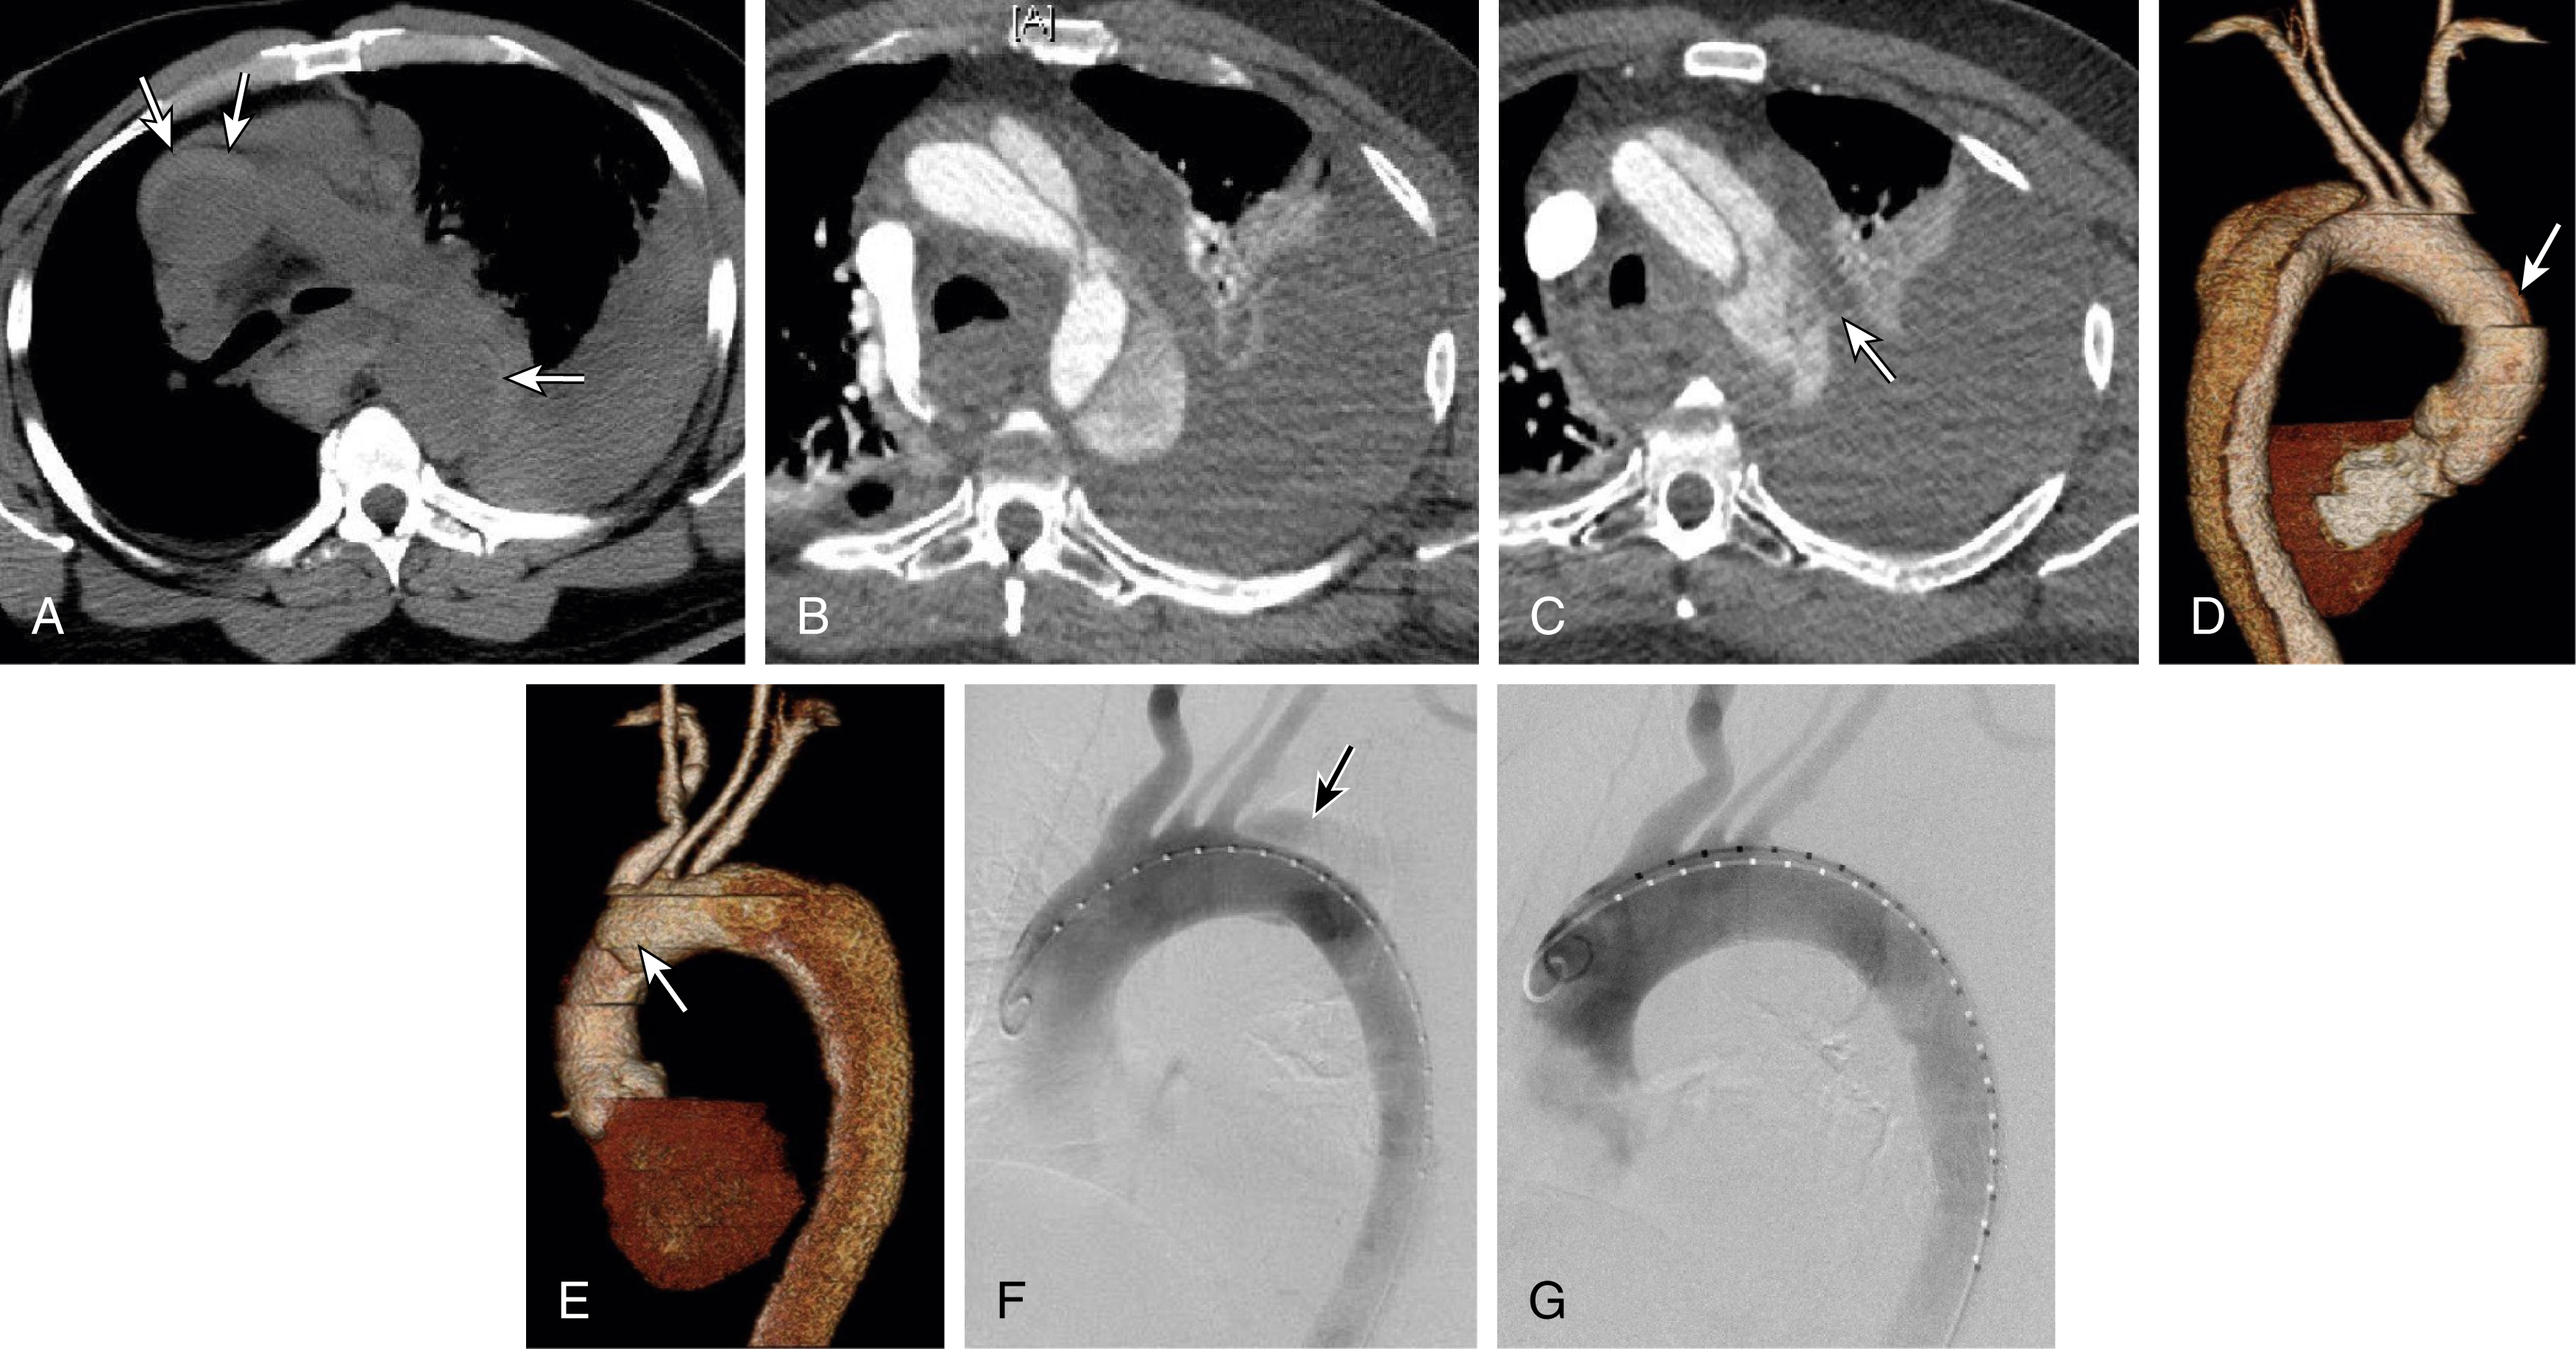 Fig. 24.1, A 69-year-old man with complicated acute type B aortic dissection managed by thoracic endograft placement. (A) Axial CT image at level of carina, without contrast enhancement. Circular rims of high-attenuation tissue density surround both ascending and proximal descending thoracic aorta ( arrows ), strongly suggesting acute aortic intramural hematoma (IMH). (B) Patient presented with chest pain and systolic blood pressure over 200 mmHg. After intravenous contrast is administered, repeated CT imaging shows aortic dissection within aortic arch. (C) CT image at a level slightly higher in arch demonstrates a large fluid density surrounding the arch and a small wisp of contrast ( arrow ) beyond the expected confines of the aorta—findings diagnostic for aortic rupture. (D) 3D surface-rendered CT image of posterior aspect of thoracic aorta demonstrates descending aorta dissection and a small amount of hematoma surrounding ascending aorta ( arrow ), without obvious abnormality affecting posterior arch. (E) Similarly rendered 3D view of anterior side of aortic arch shows obvious involvement of arch, with dissection extending along its anterior surface ( arrow ). (F) Left anterior oblique projection of a thoracic aortogram shows location of primary entry tear just distal to left subclavian artery, with opacification of a limited extent of false lumen ( arrow ). Together the imaging allows a diagnosis of a type IIIa aortic dissection with retrograde proximal extension from a primary entry tear just distal to left subclavian artery origin. False lumen is patent to a limited extent in the arch, but not in ascending aorta, where there is only evidence of IMH. (G) Aortogram after deployment of endovascular stent-graft across primary entry tear, extending from left subclavian artery origin to mid-segment of descending aorta. After TEVAR there is no longer filling of false lumen. Patient was discharged home on third day after procedure.